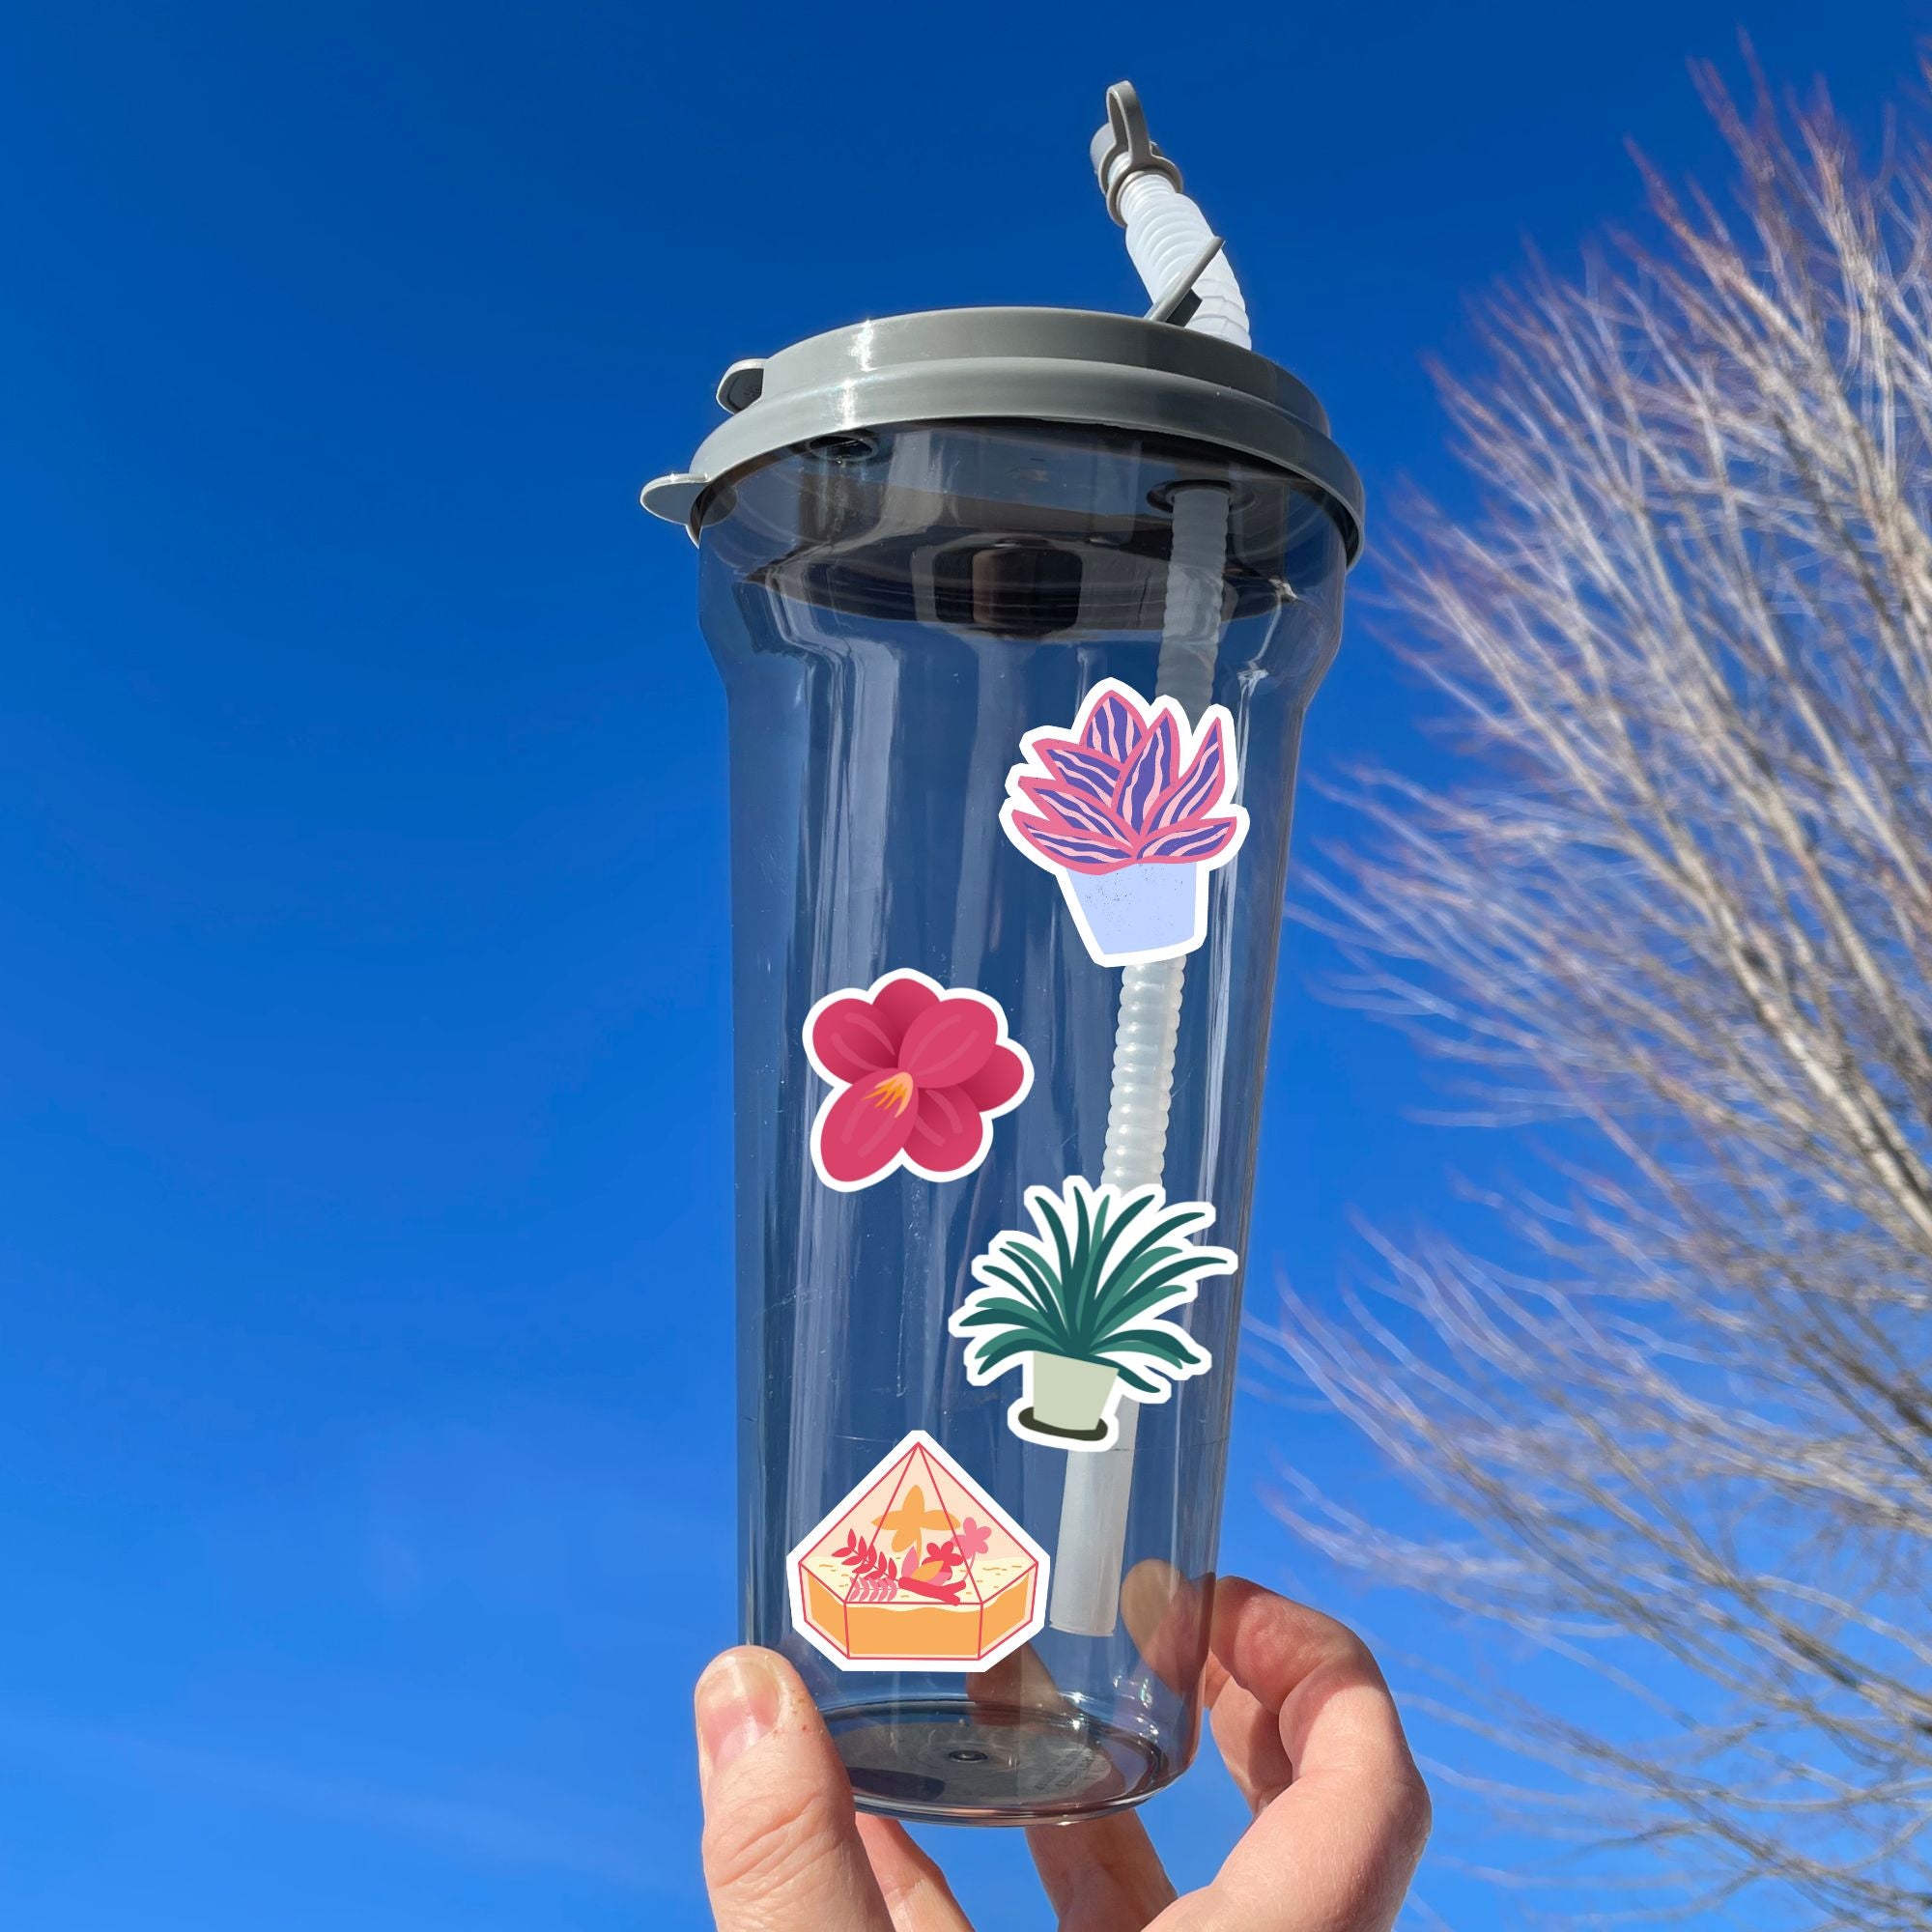 Let your green thumb shine with this sticker sheet. It features a variety of succulent plant stickers that are perfect for your favorite gardener! This image shows a water bottle with four different succulent plant stickers applied to it.